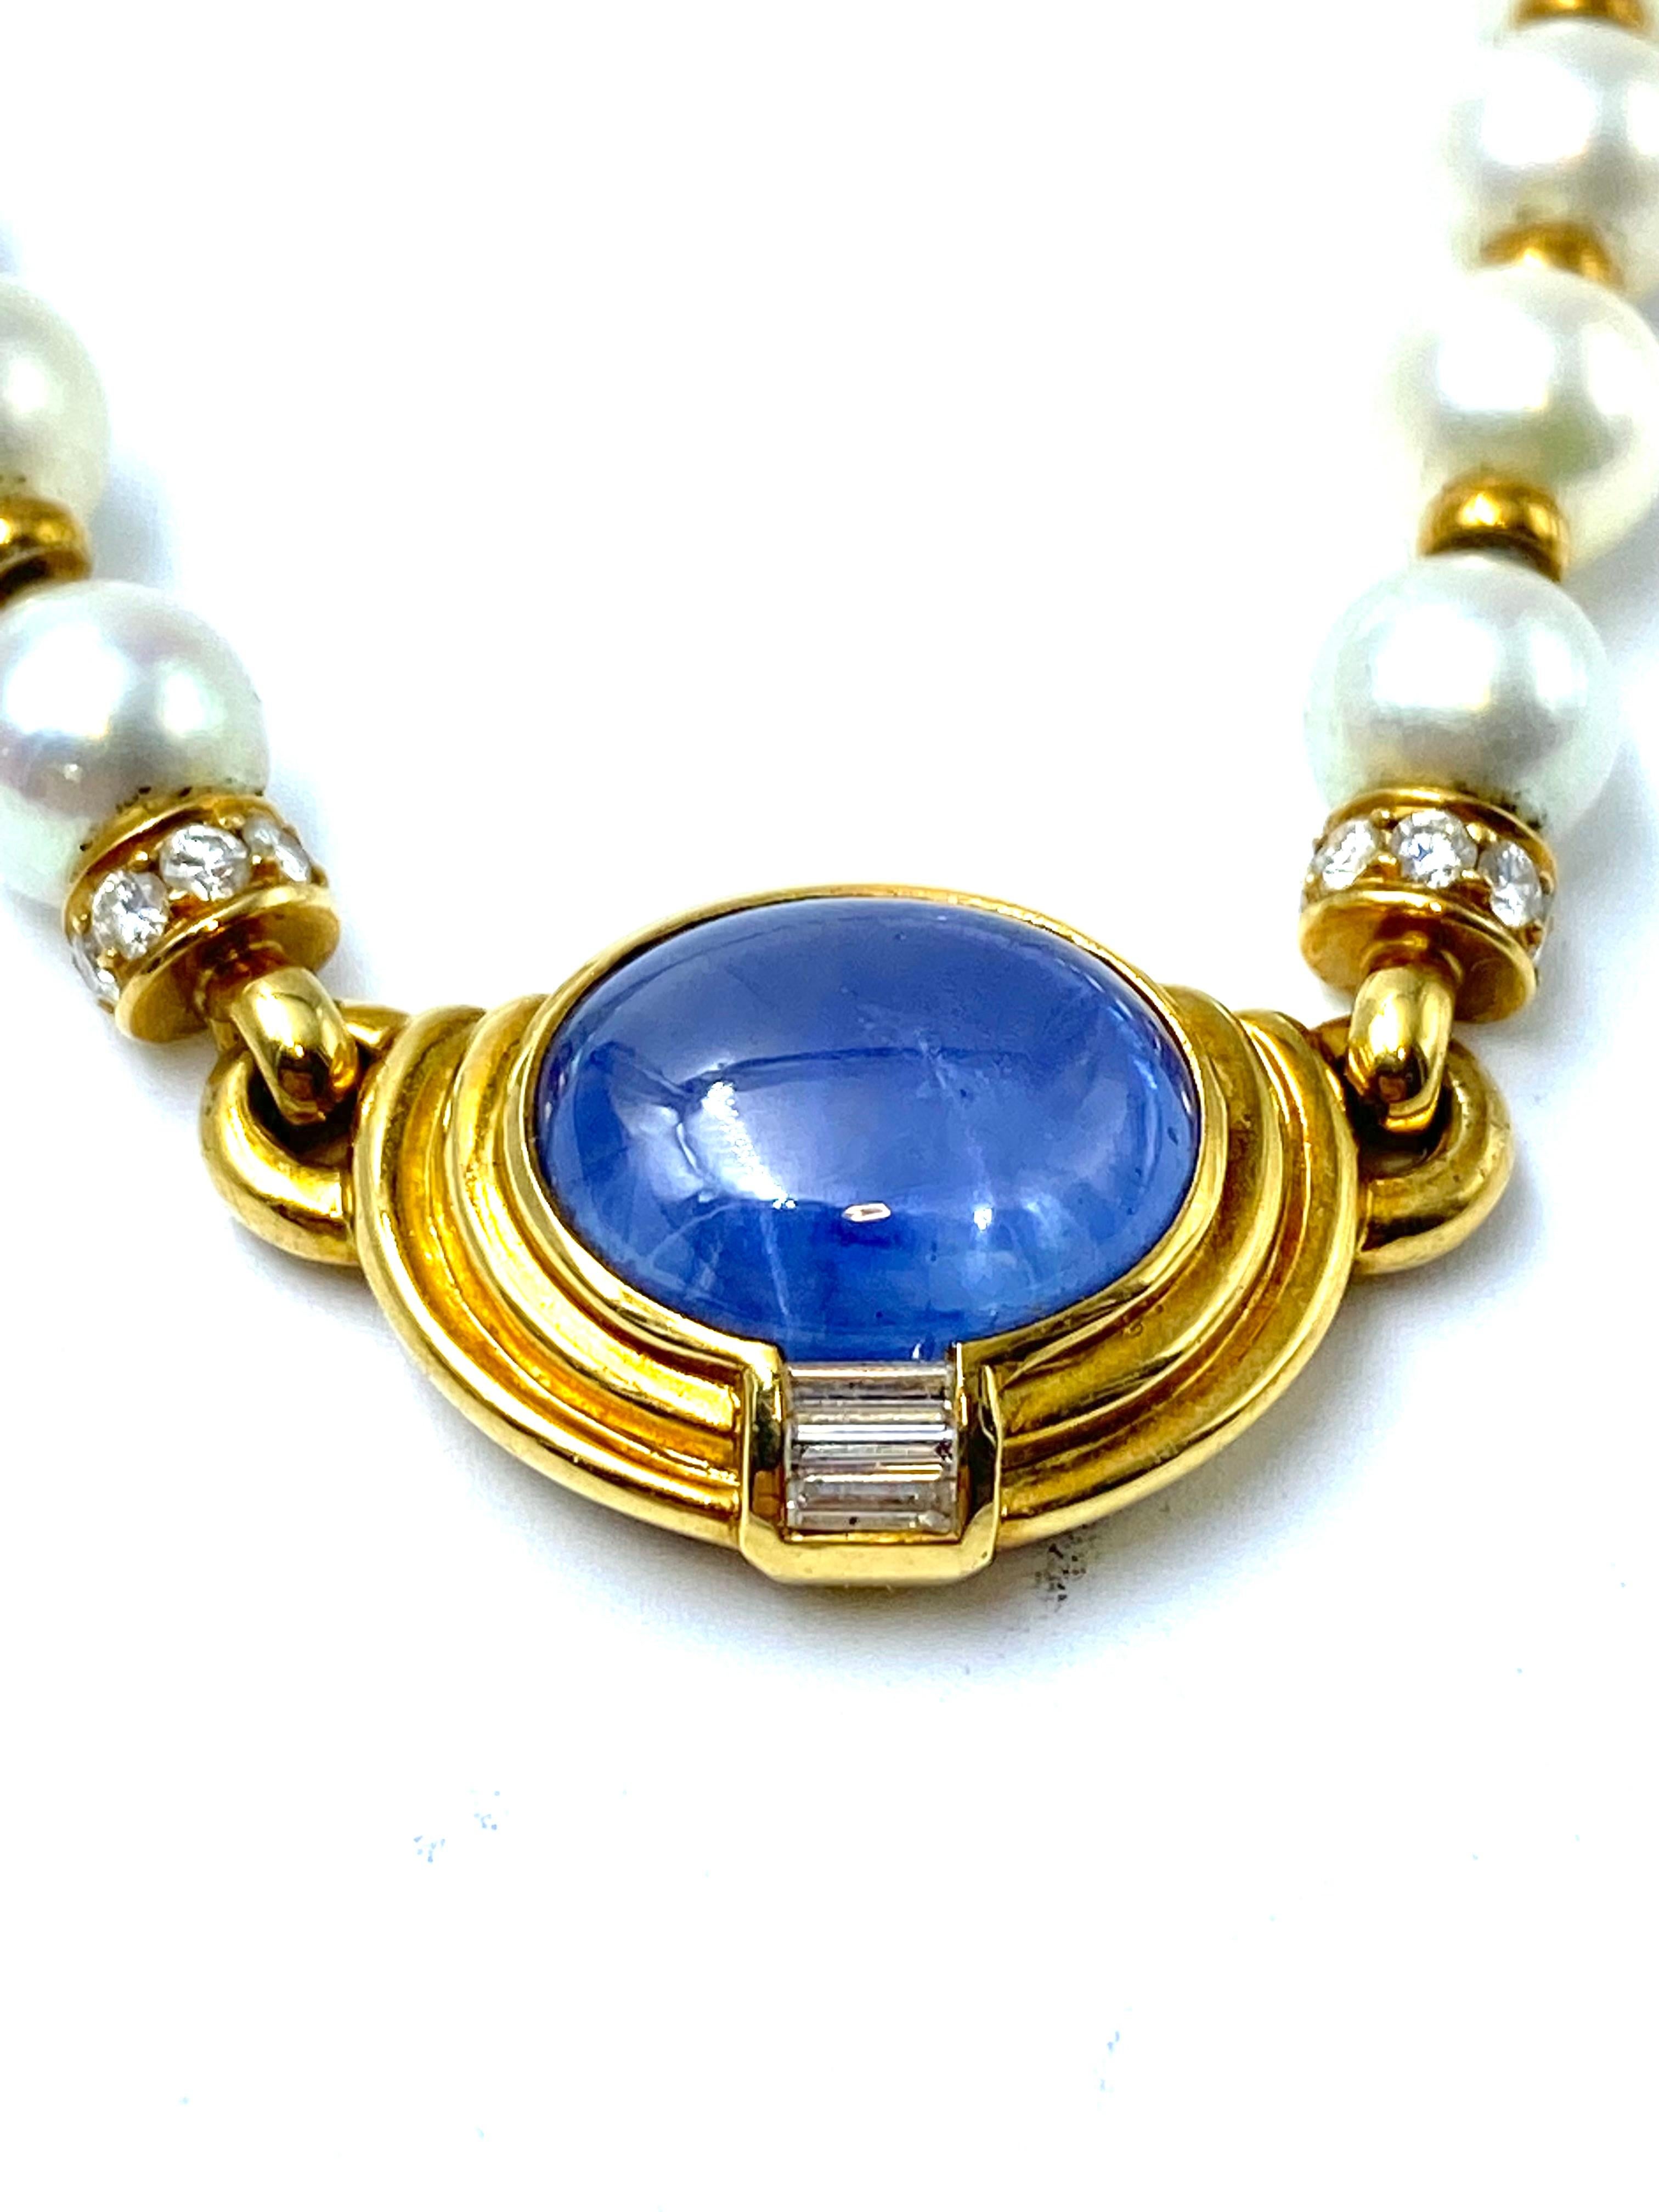 Refined pearl necklace, each separated by a small yellow gold disc.
The centerpiece bears a 